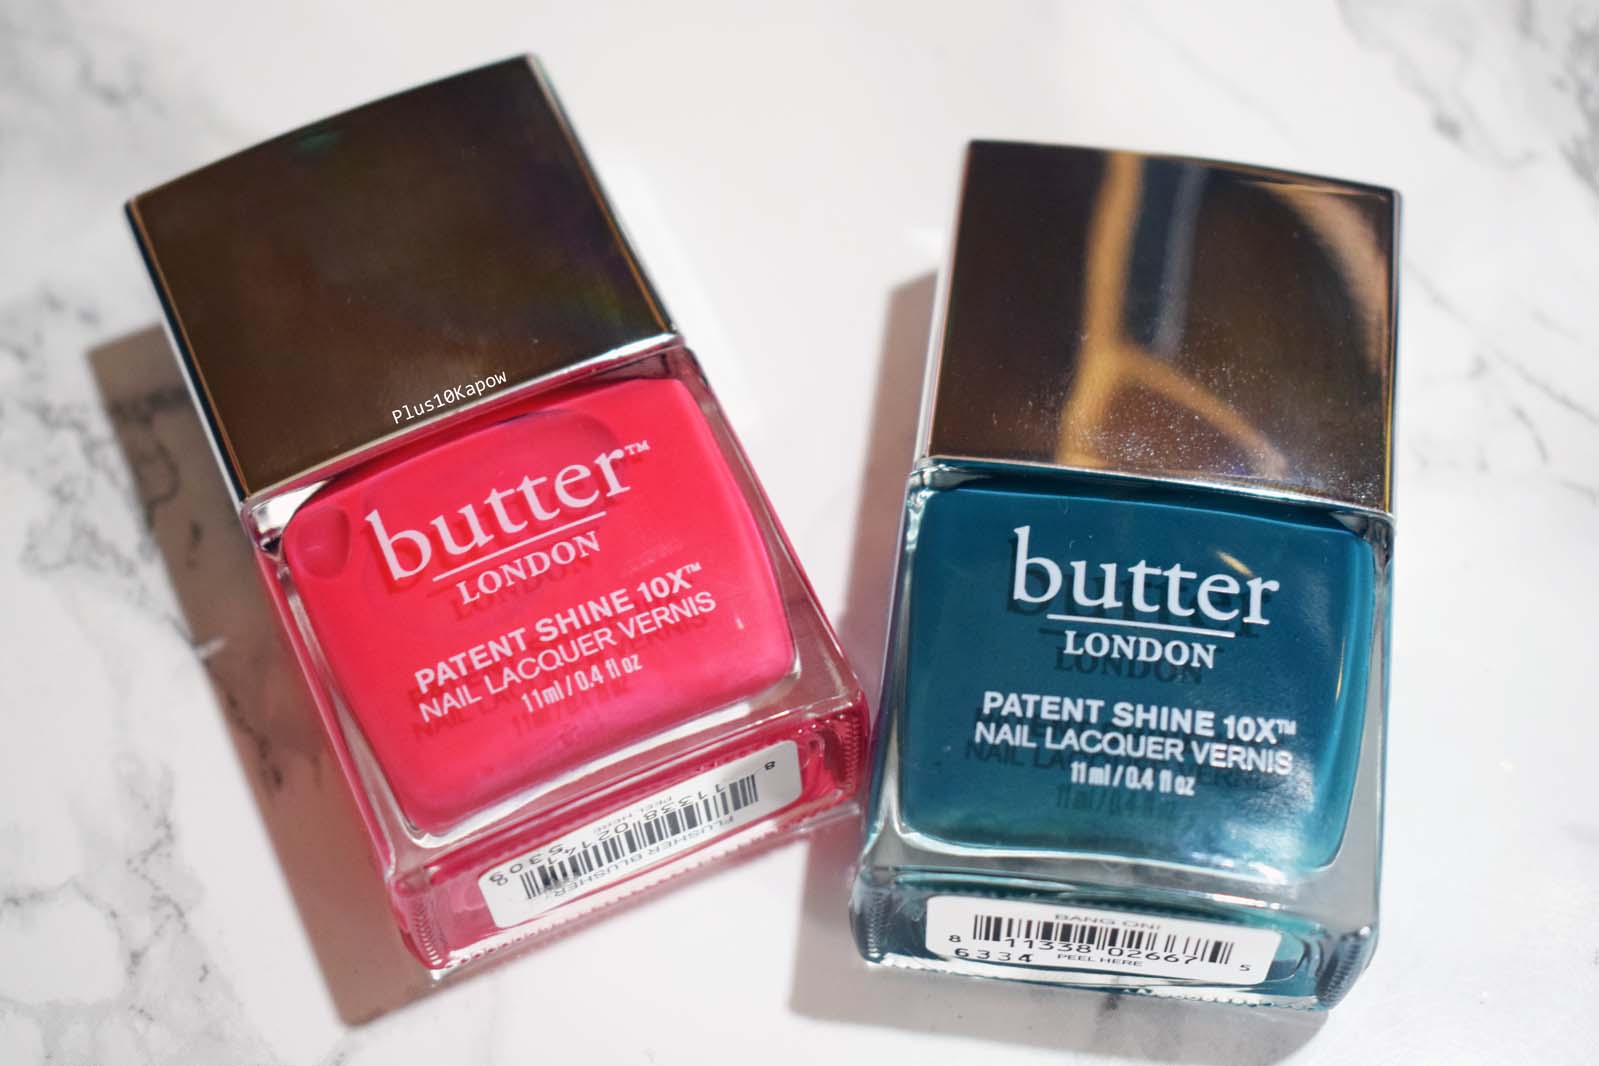 7. Butter London Patent Shine 10X Nail Lacquer in "Ruby Murray" - wide 6